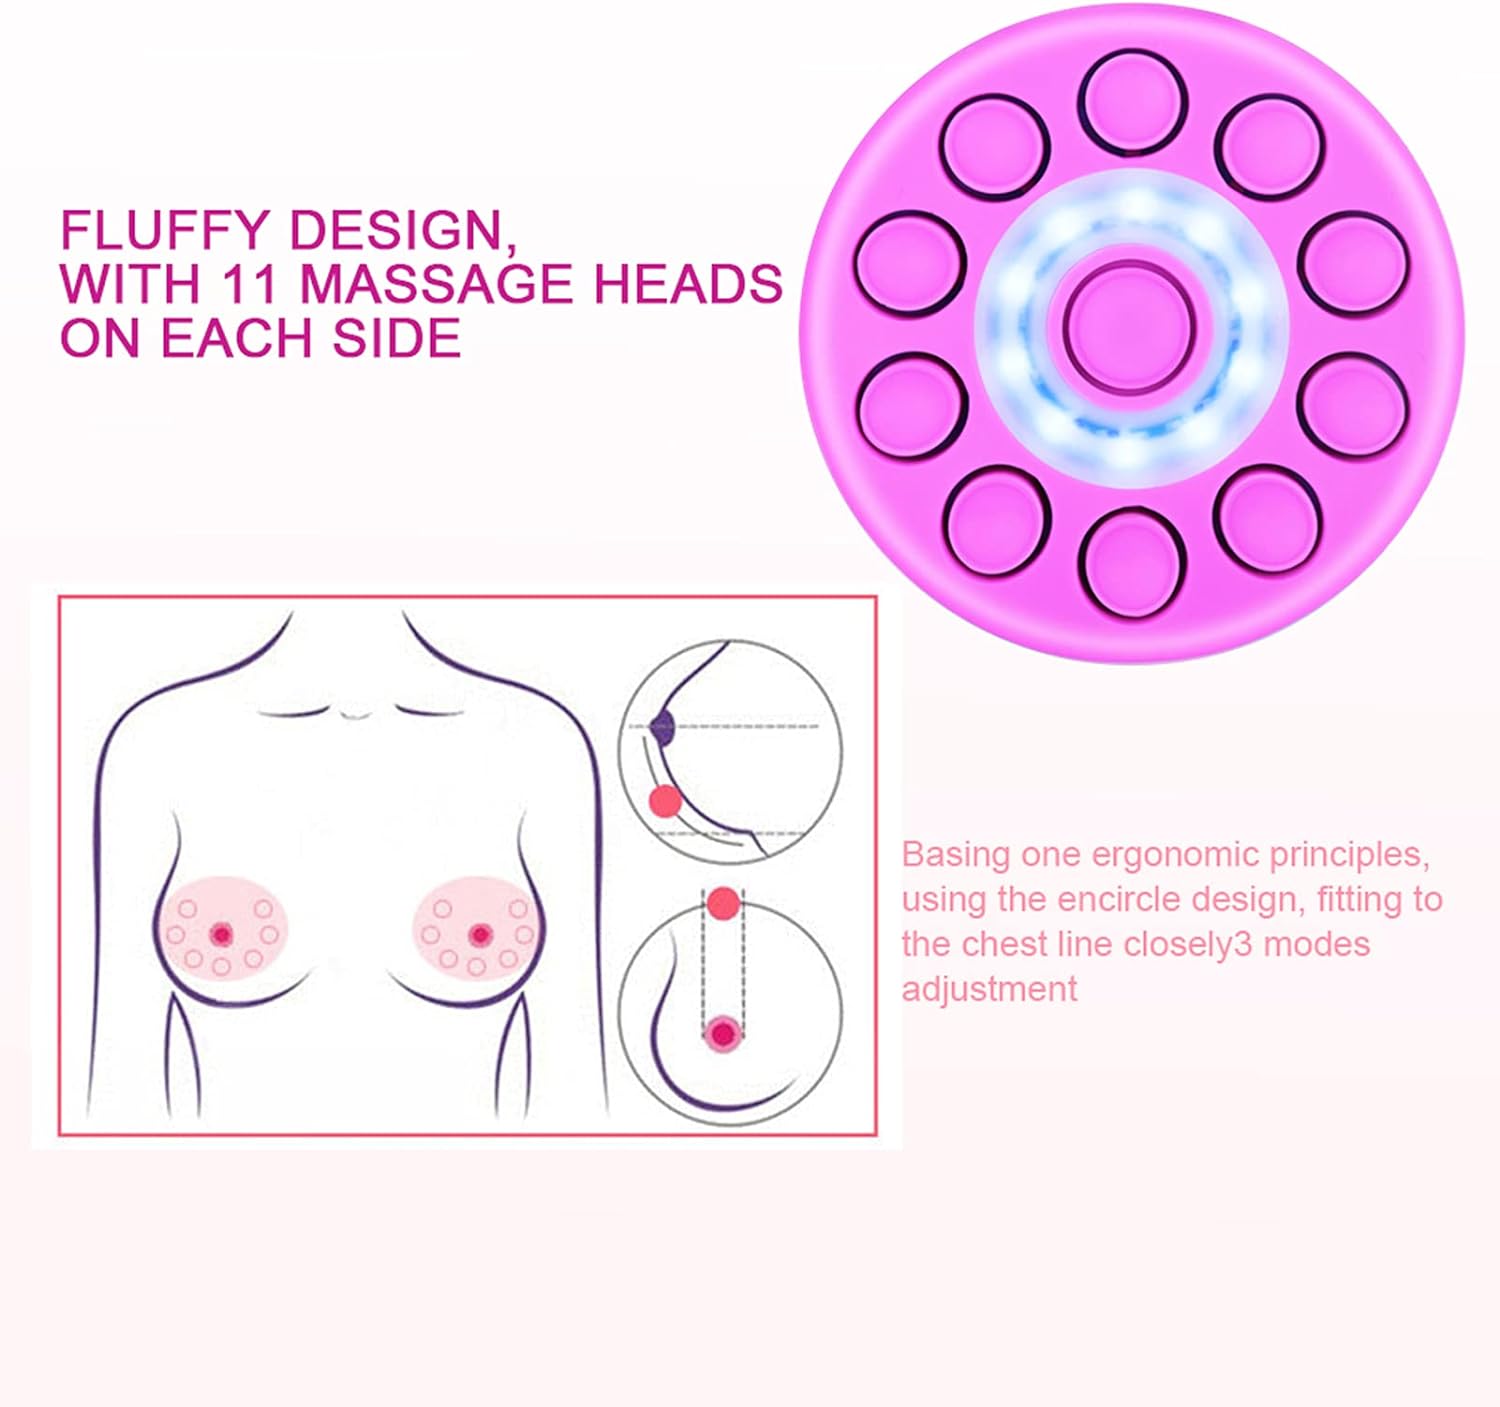 Electric Breast Massager USB Wireless Chest Massage Stimulator Breast Practical Tools